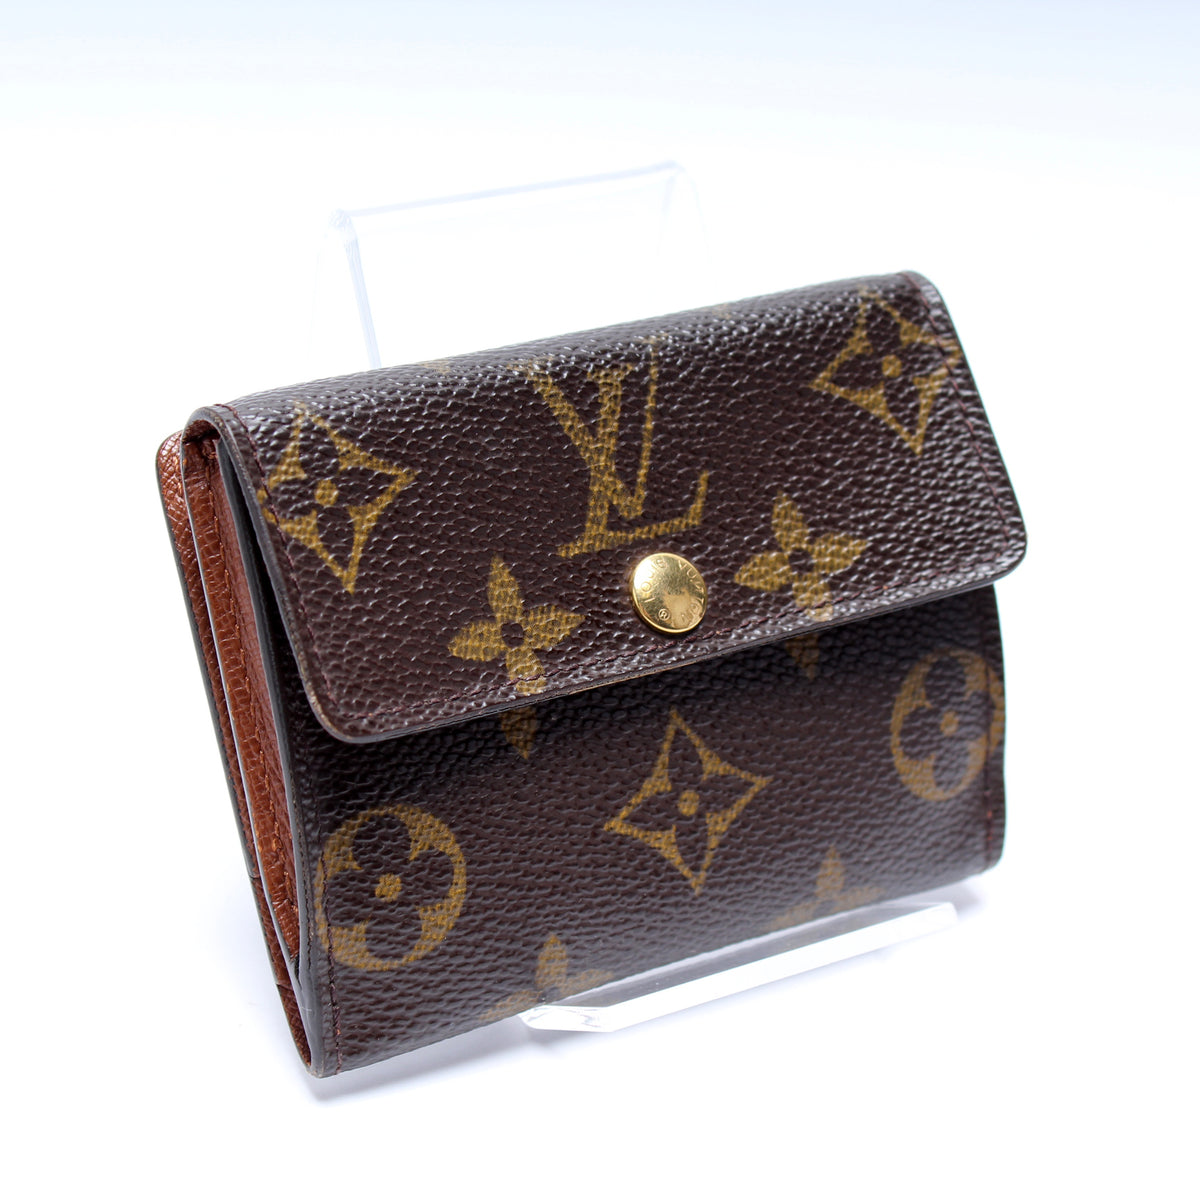 Authenticated Used LOUIS VUITTON Louis Vuitton Ludlow Coin Case